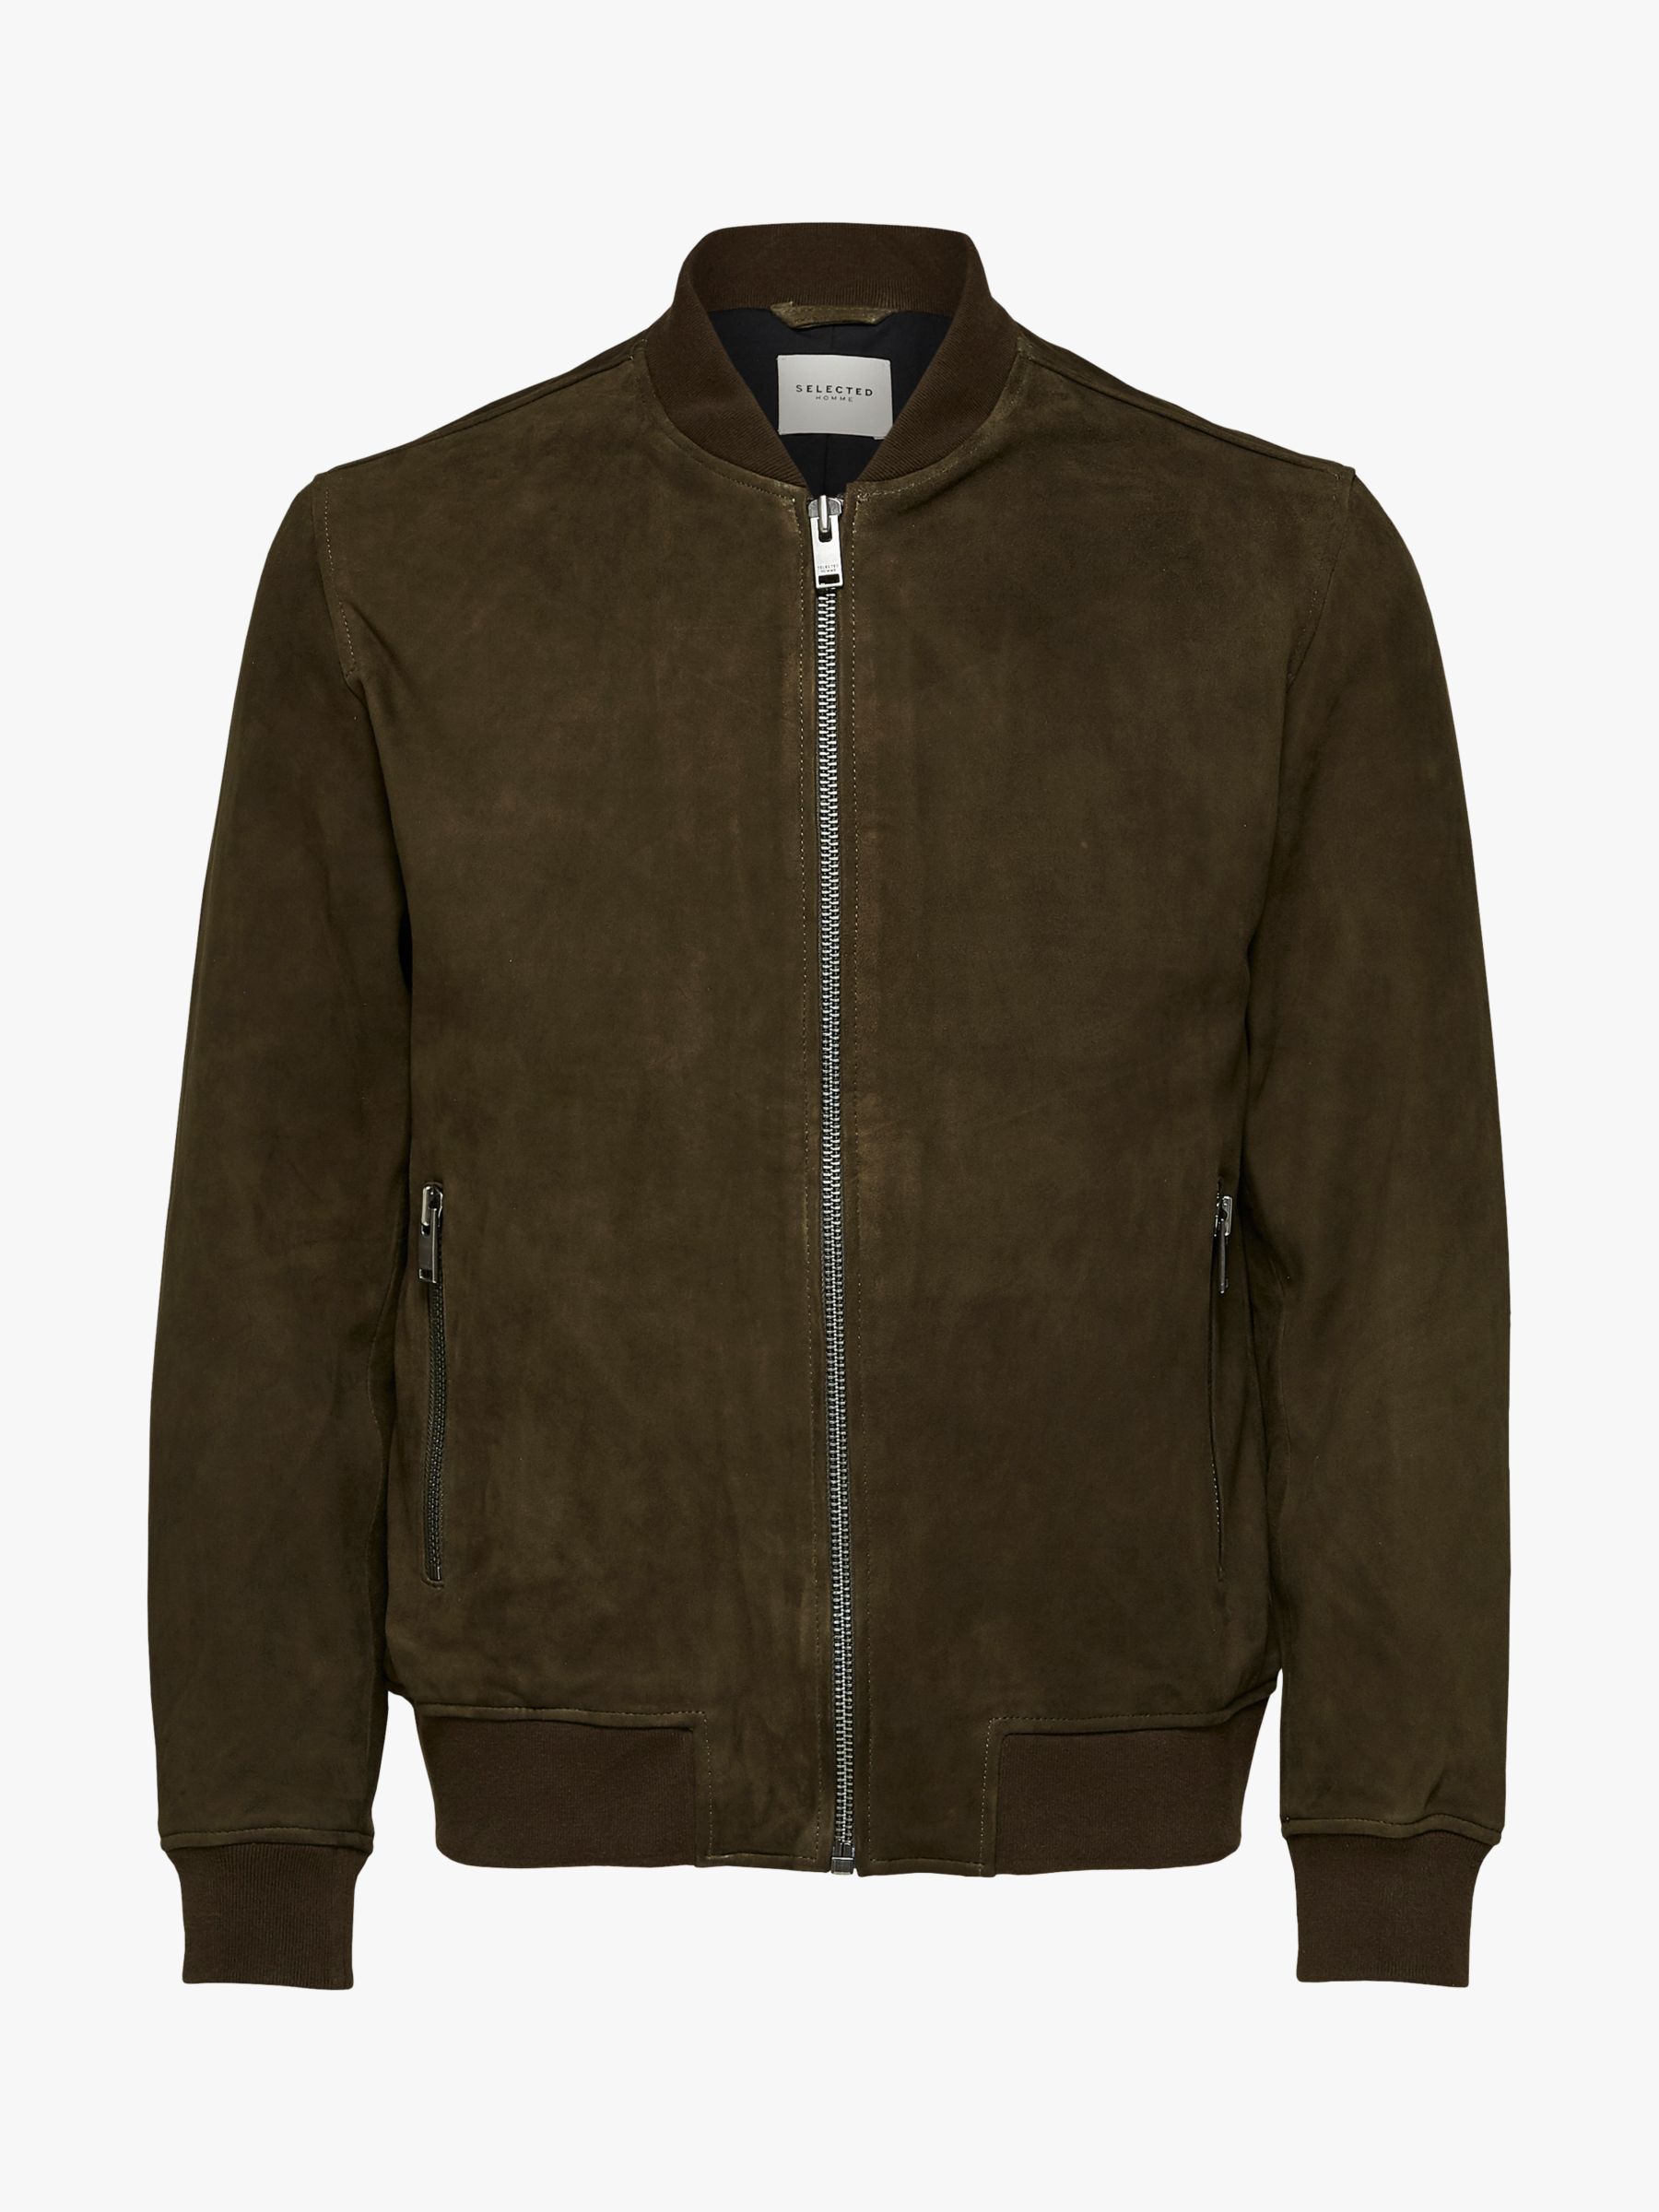 SELECTED HOMME Suede Leather Jacket, Brown